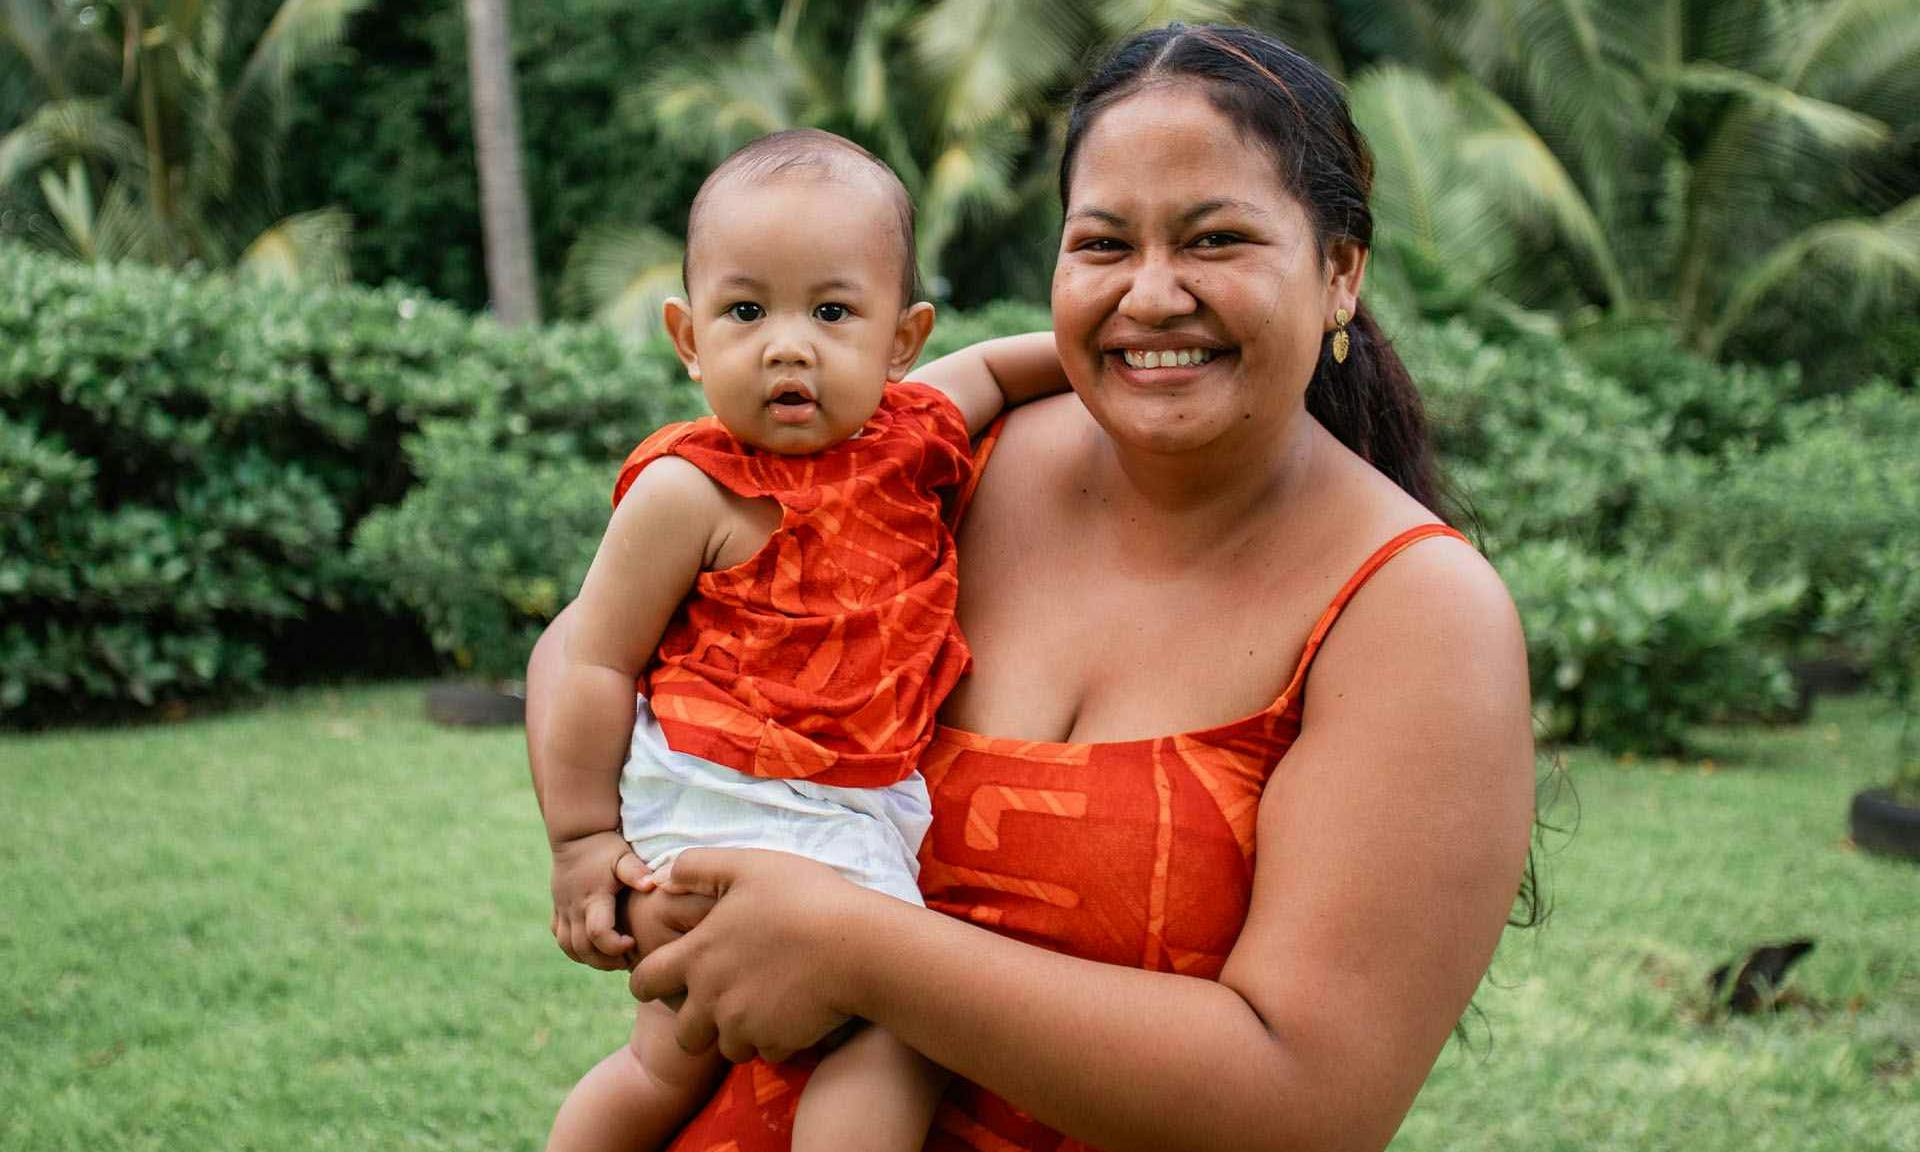 Children across the Pacific to receive lifesaving vaccines